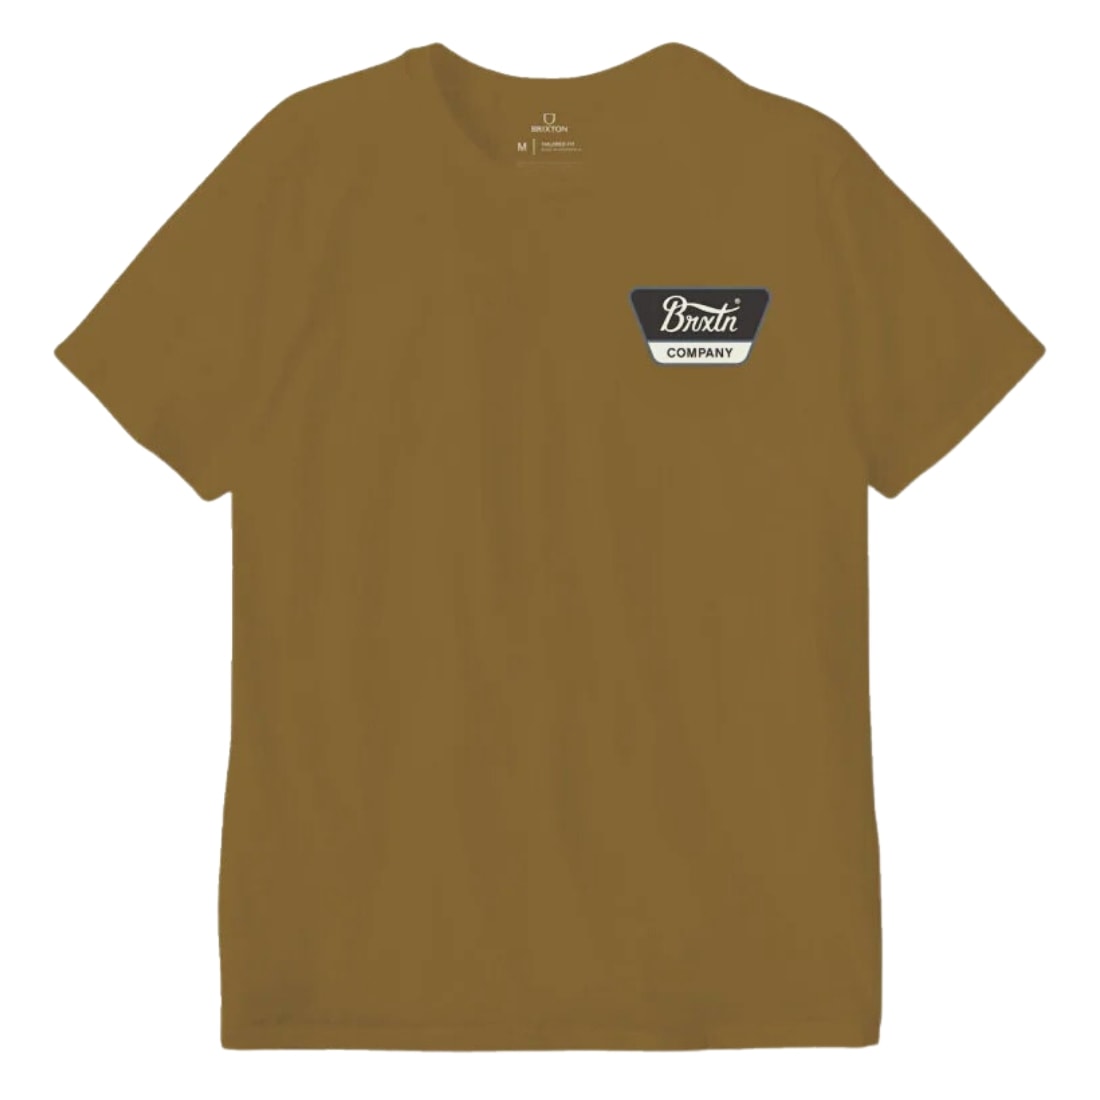 Brixton Linwood T-Shirt - Golden Brown/Washed Black/Off White - Mens Graphic T-Shirt by Brixton